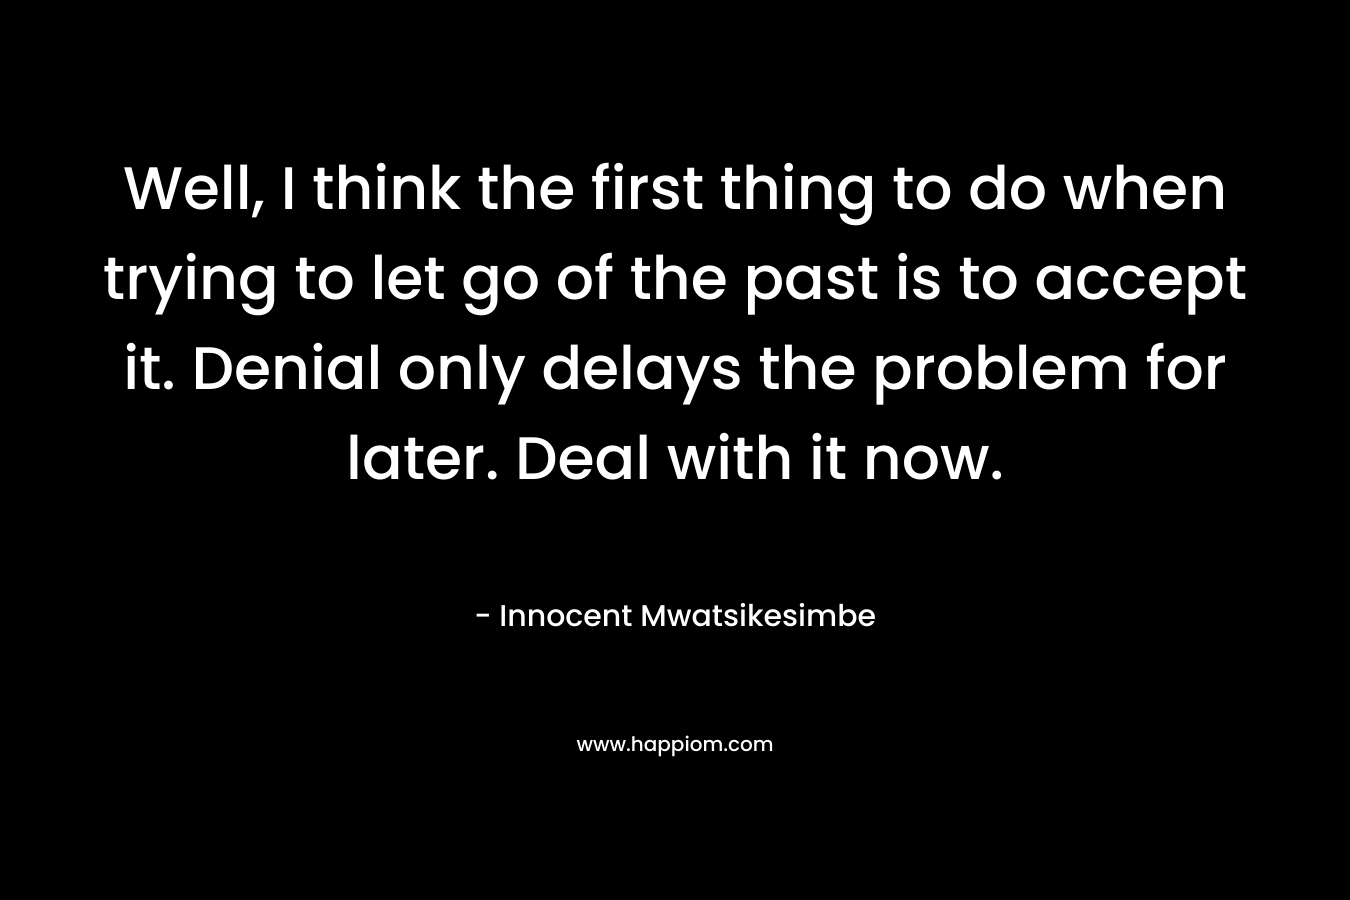 Well, I think the first thing to do when trying to let go of the past is to accept it. Denial only delays the problem for later. Deal with it now.